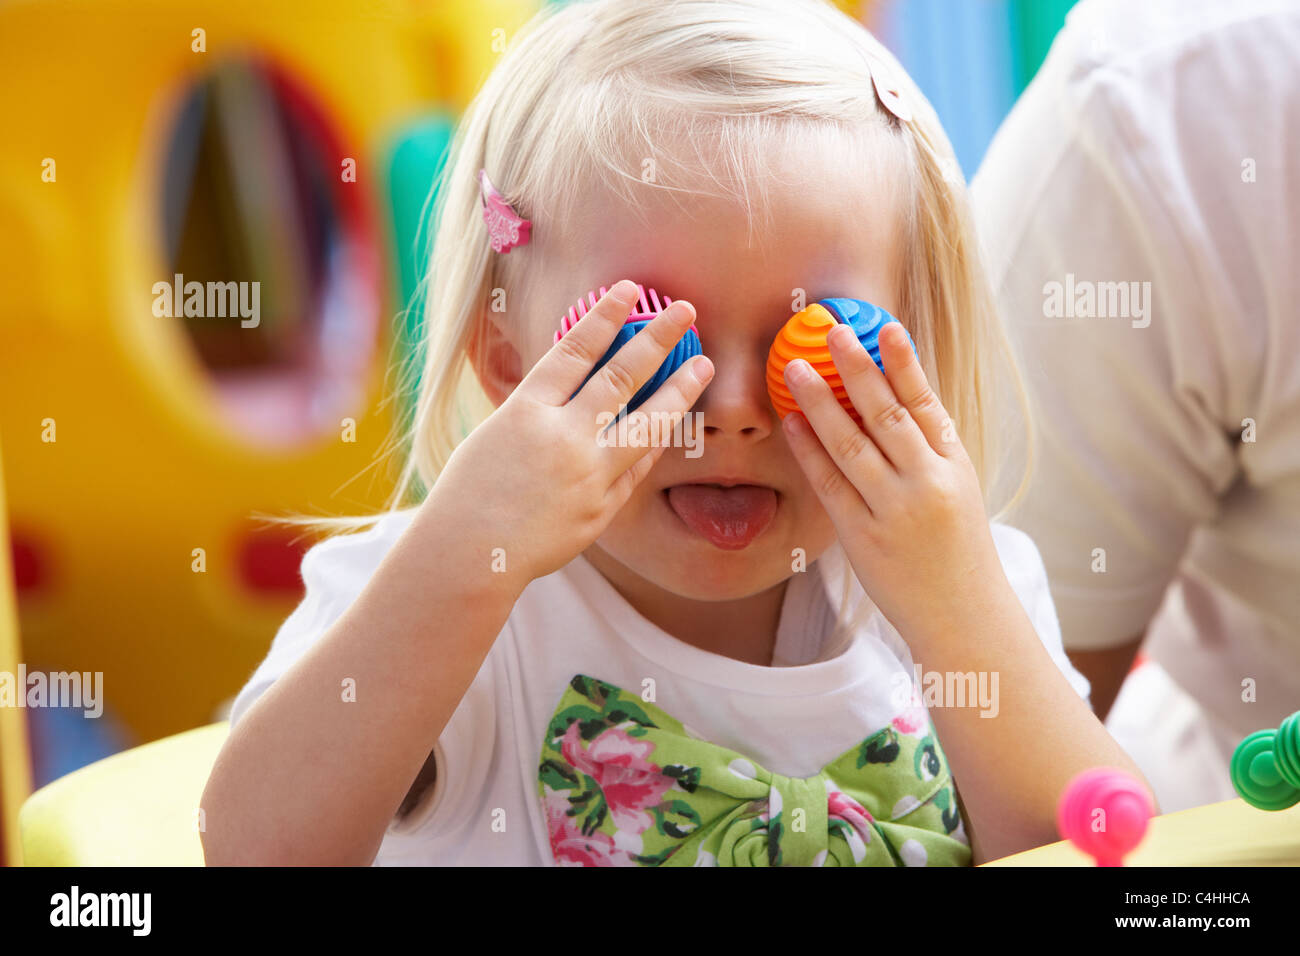 Young girl playing with toys Stock Photo